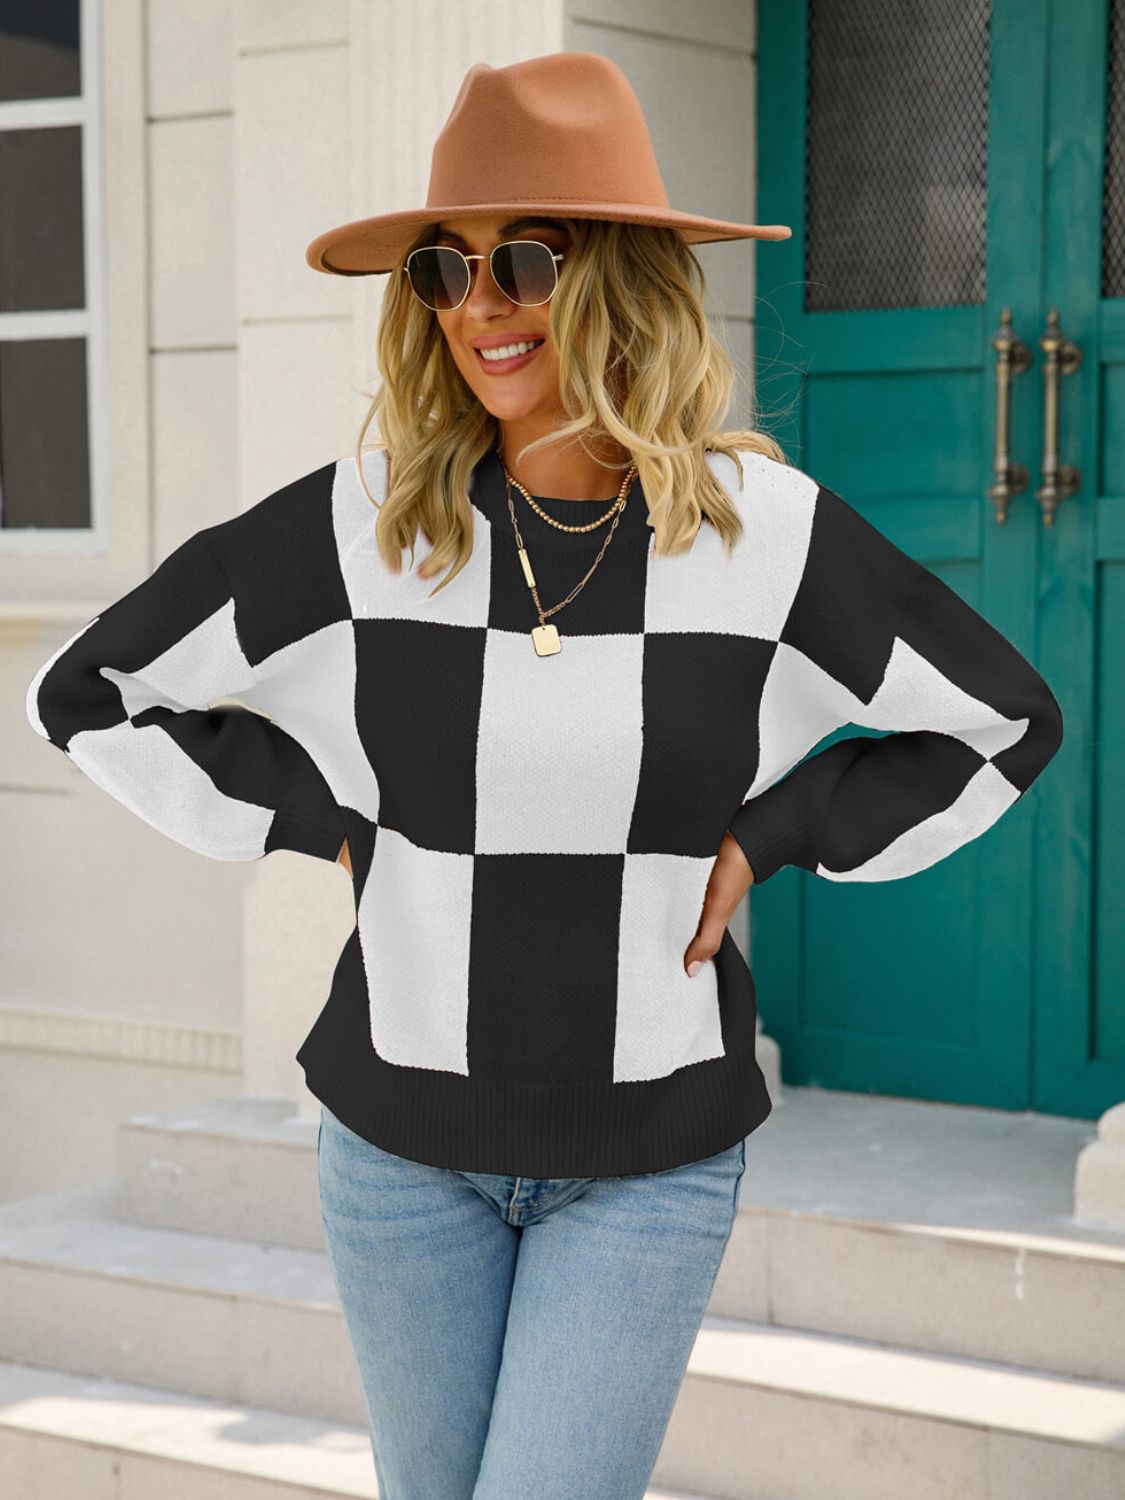 Checkered Dropped Shoulder Knit Pullover